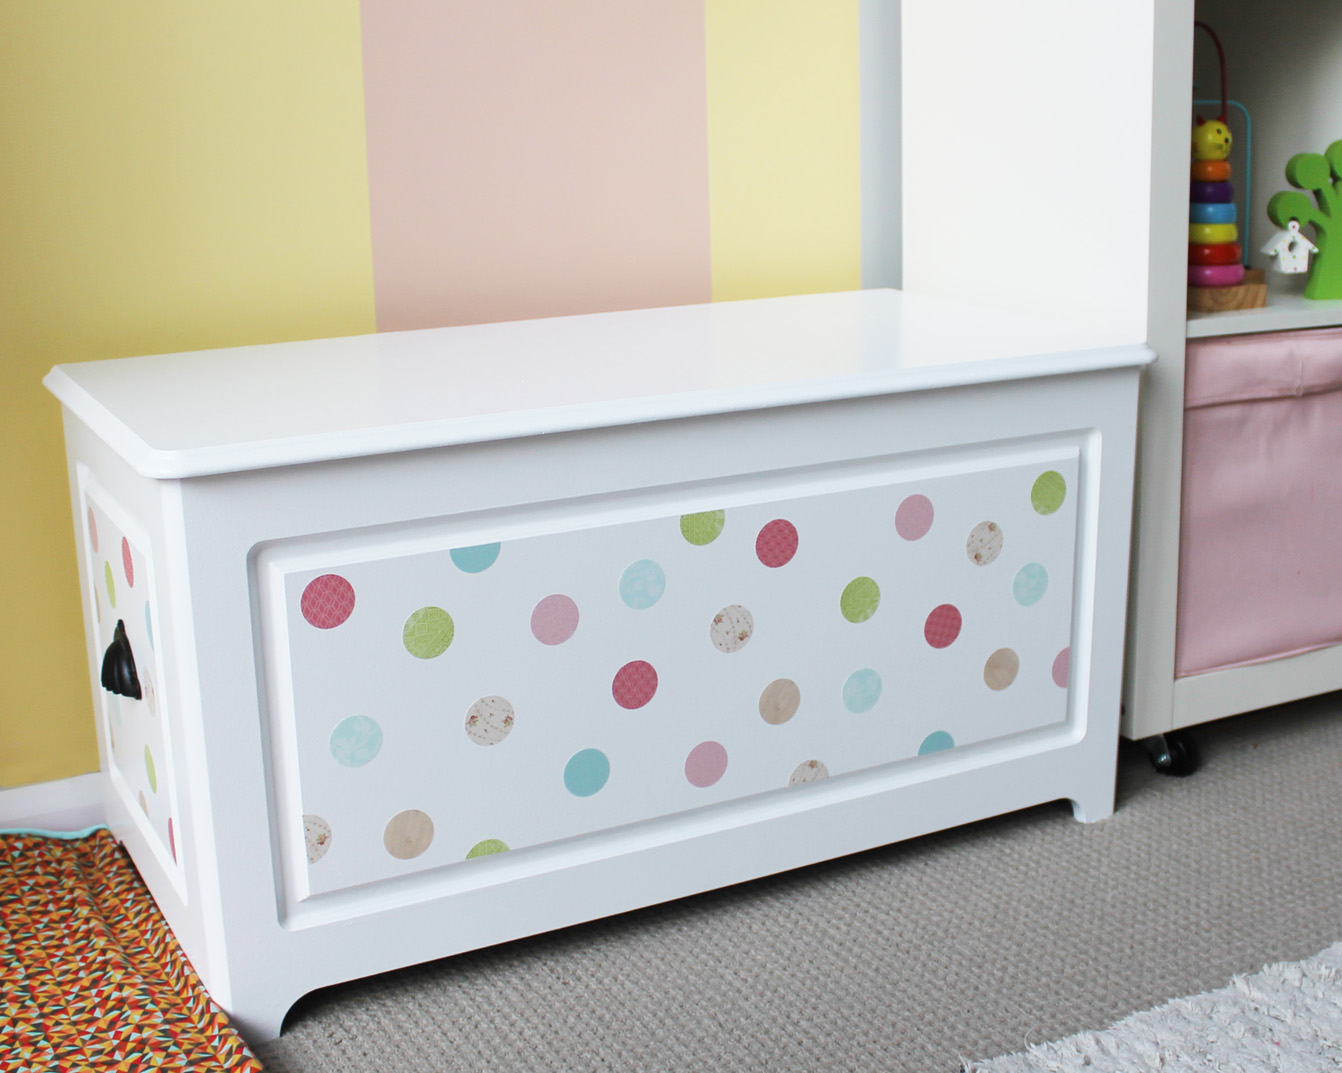 DIY toy box makeover! Turn that toy box frown upside down!